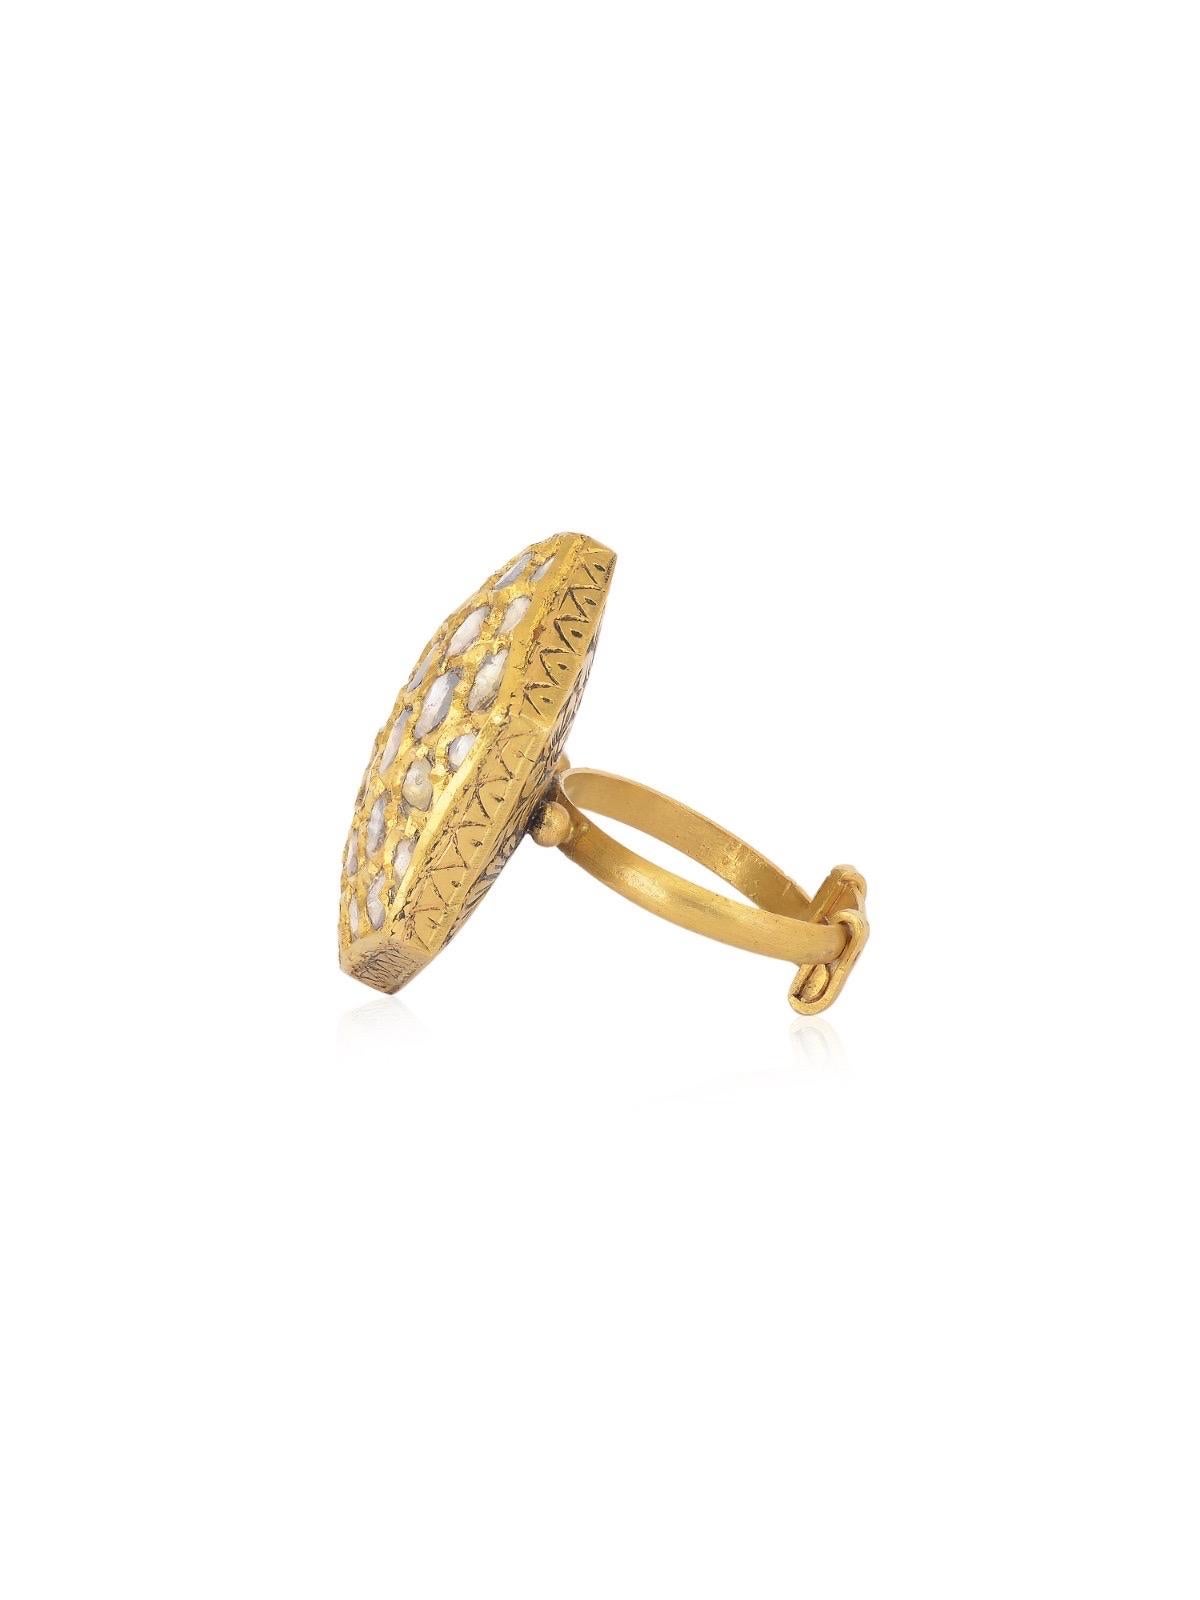 Artisan 22k Handmade Gold Ring with Uncut Diamonds For Sale